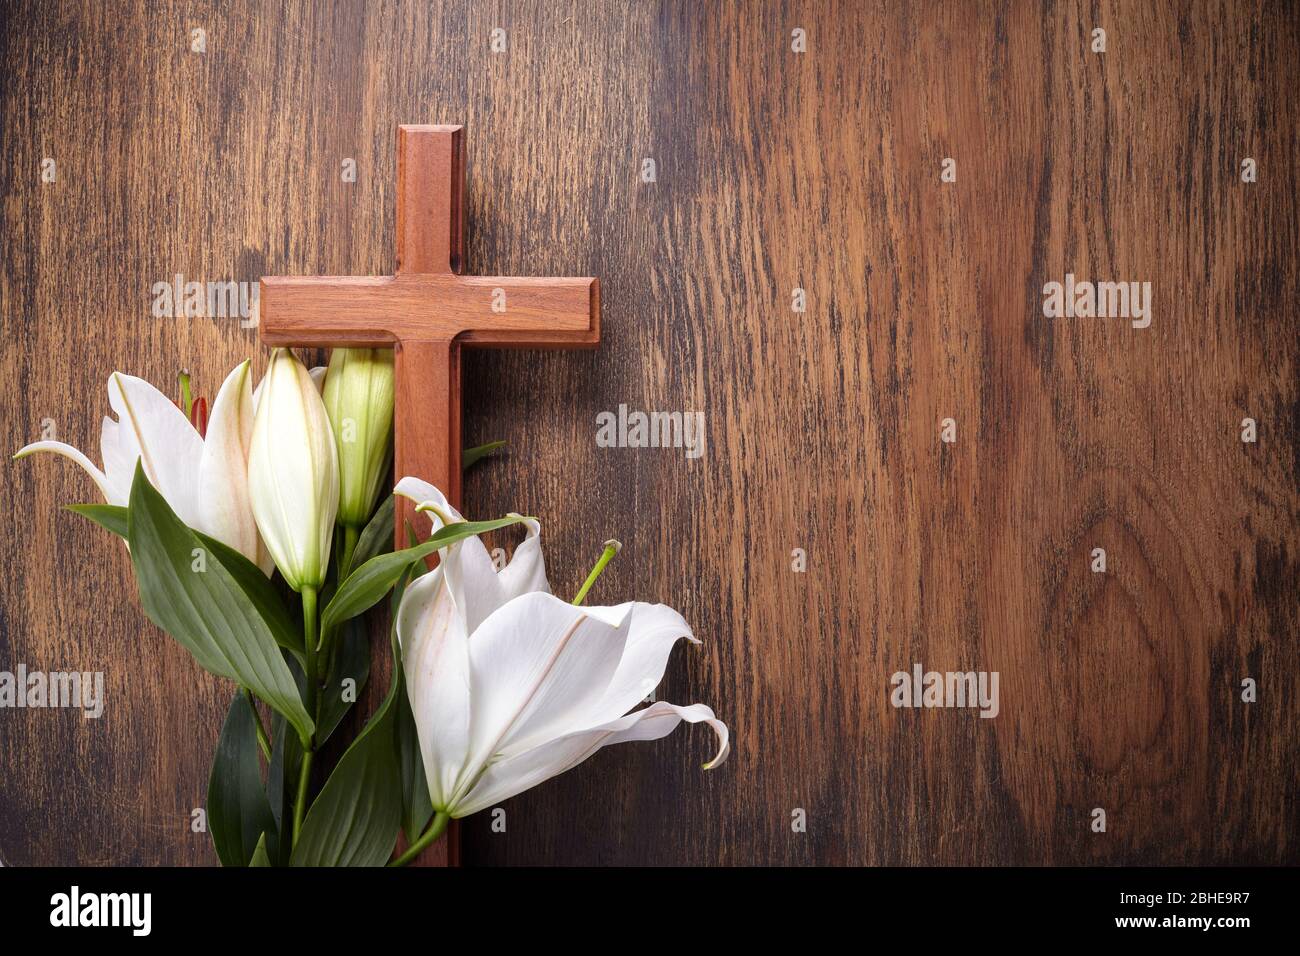 Wooden cross and white lily on rustic table Stock Photo